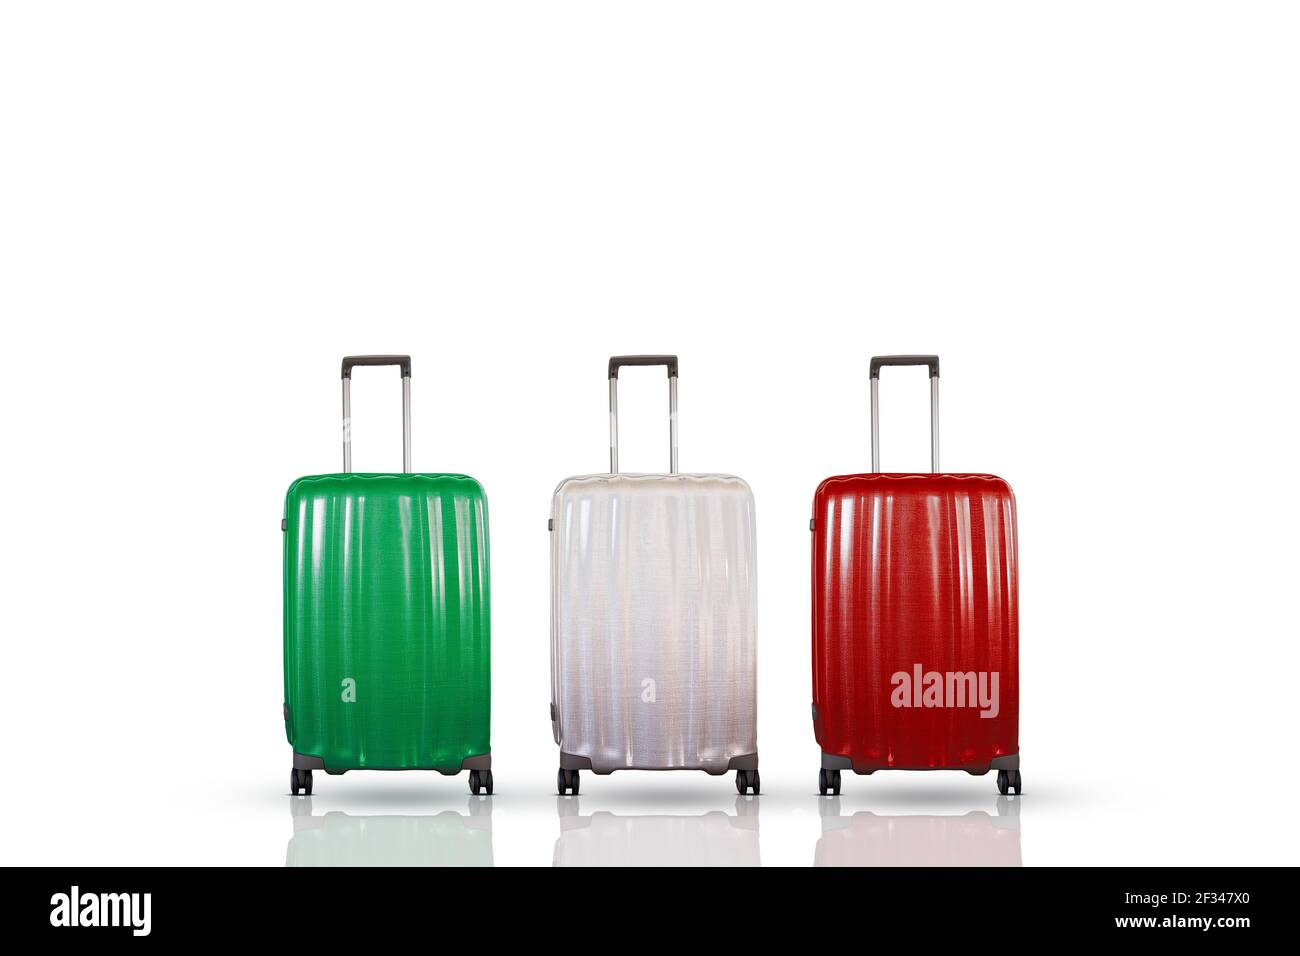 Three colored suitcases representing the Flag of Italy. Stock Photo